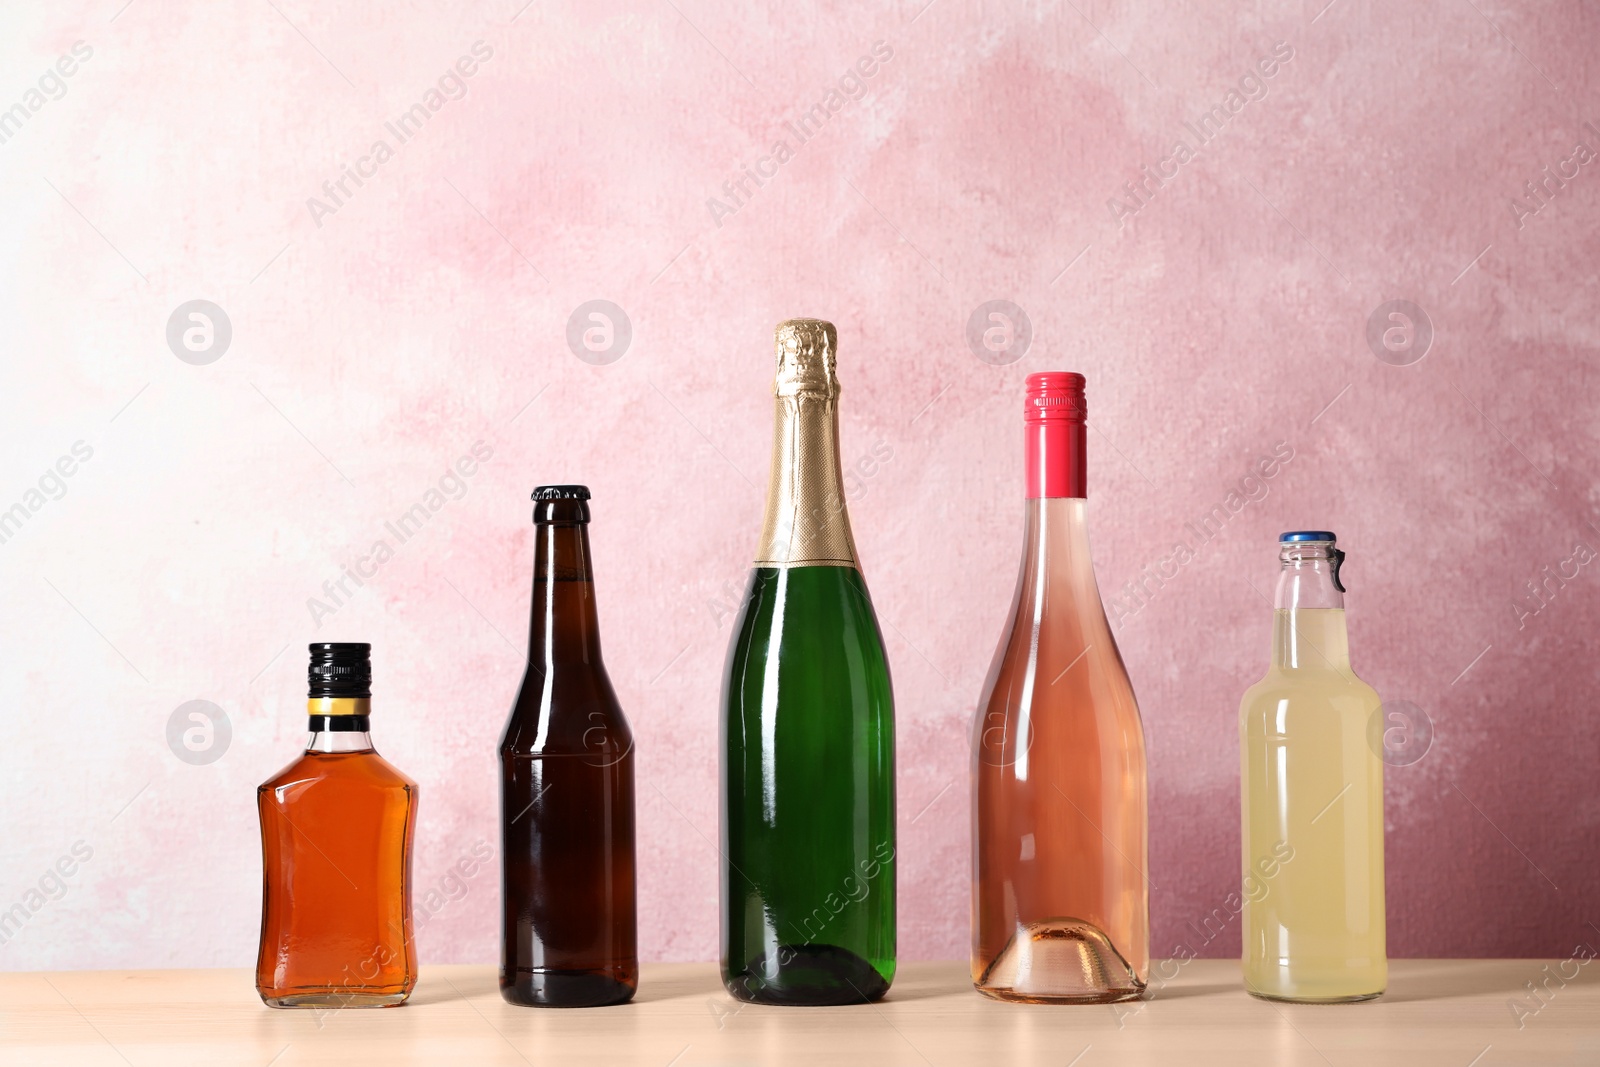 Photo of Bottles with different alcoholic drinks on table against color background